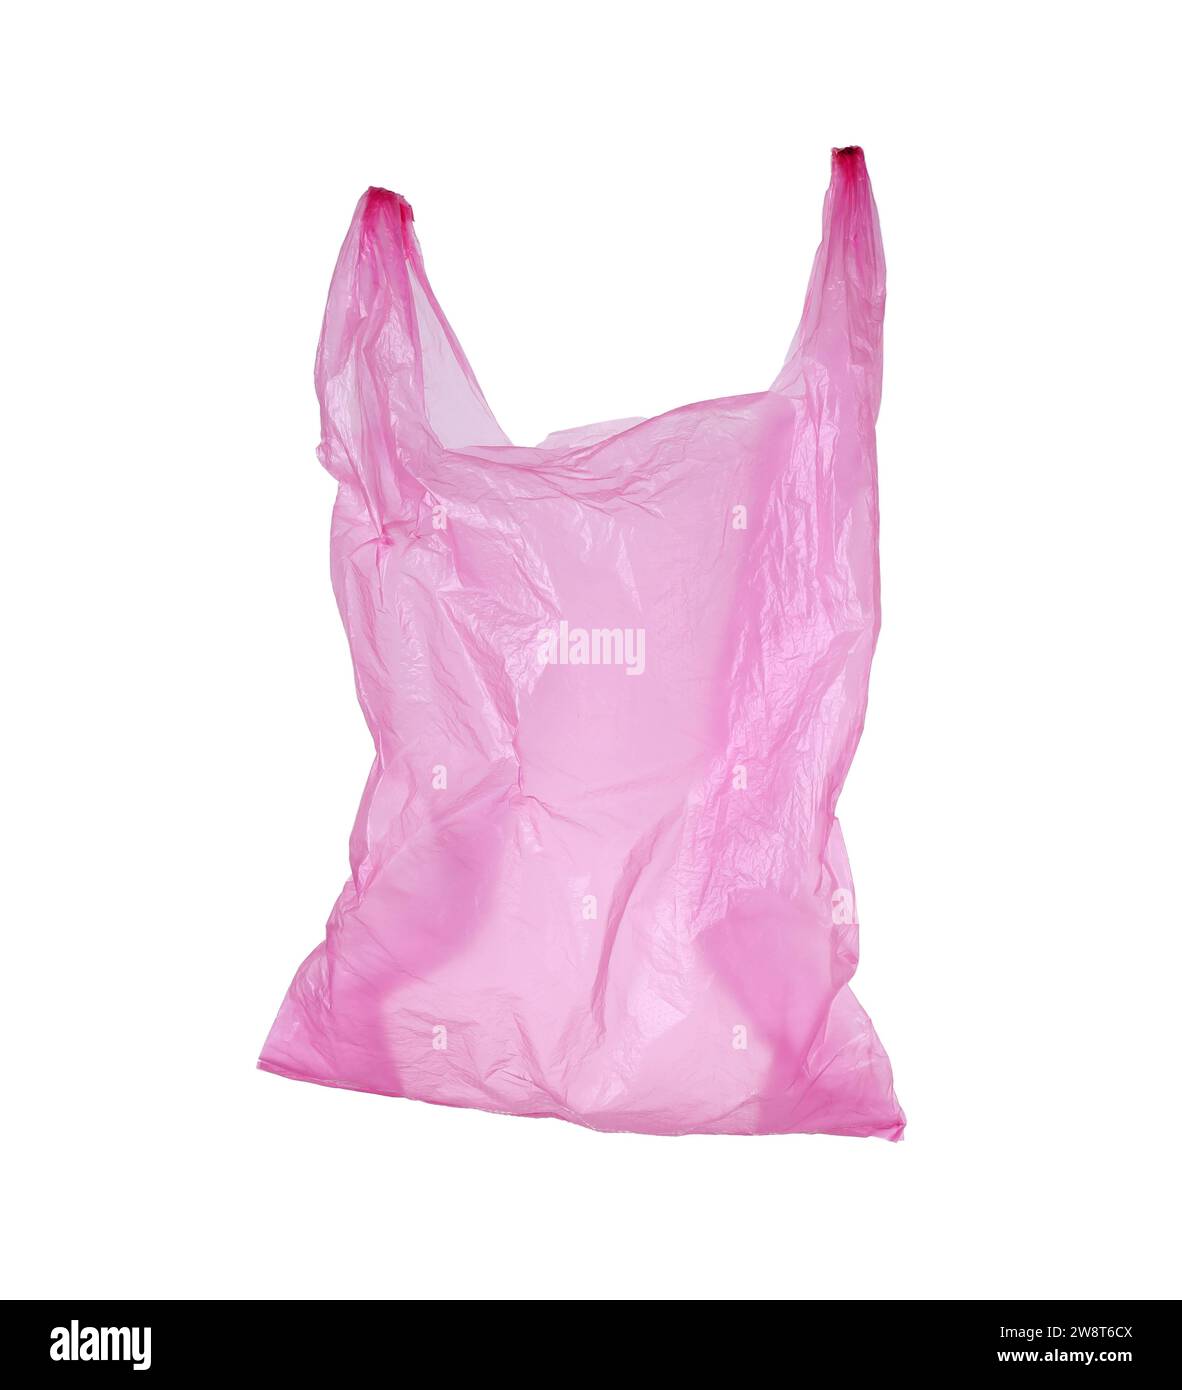 One pink plastic bag isolated on white Stock Photo